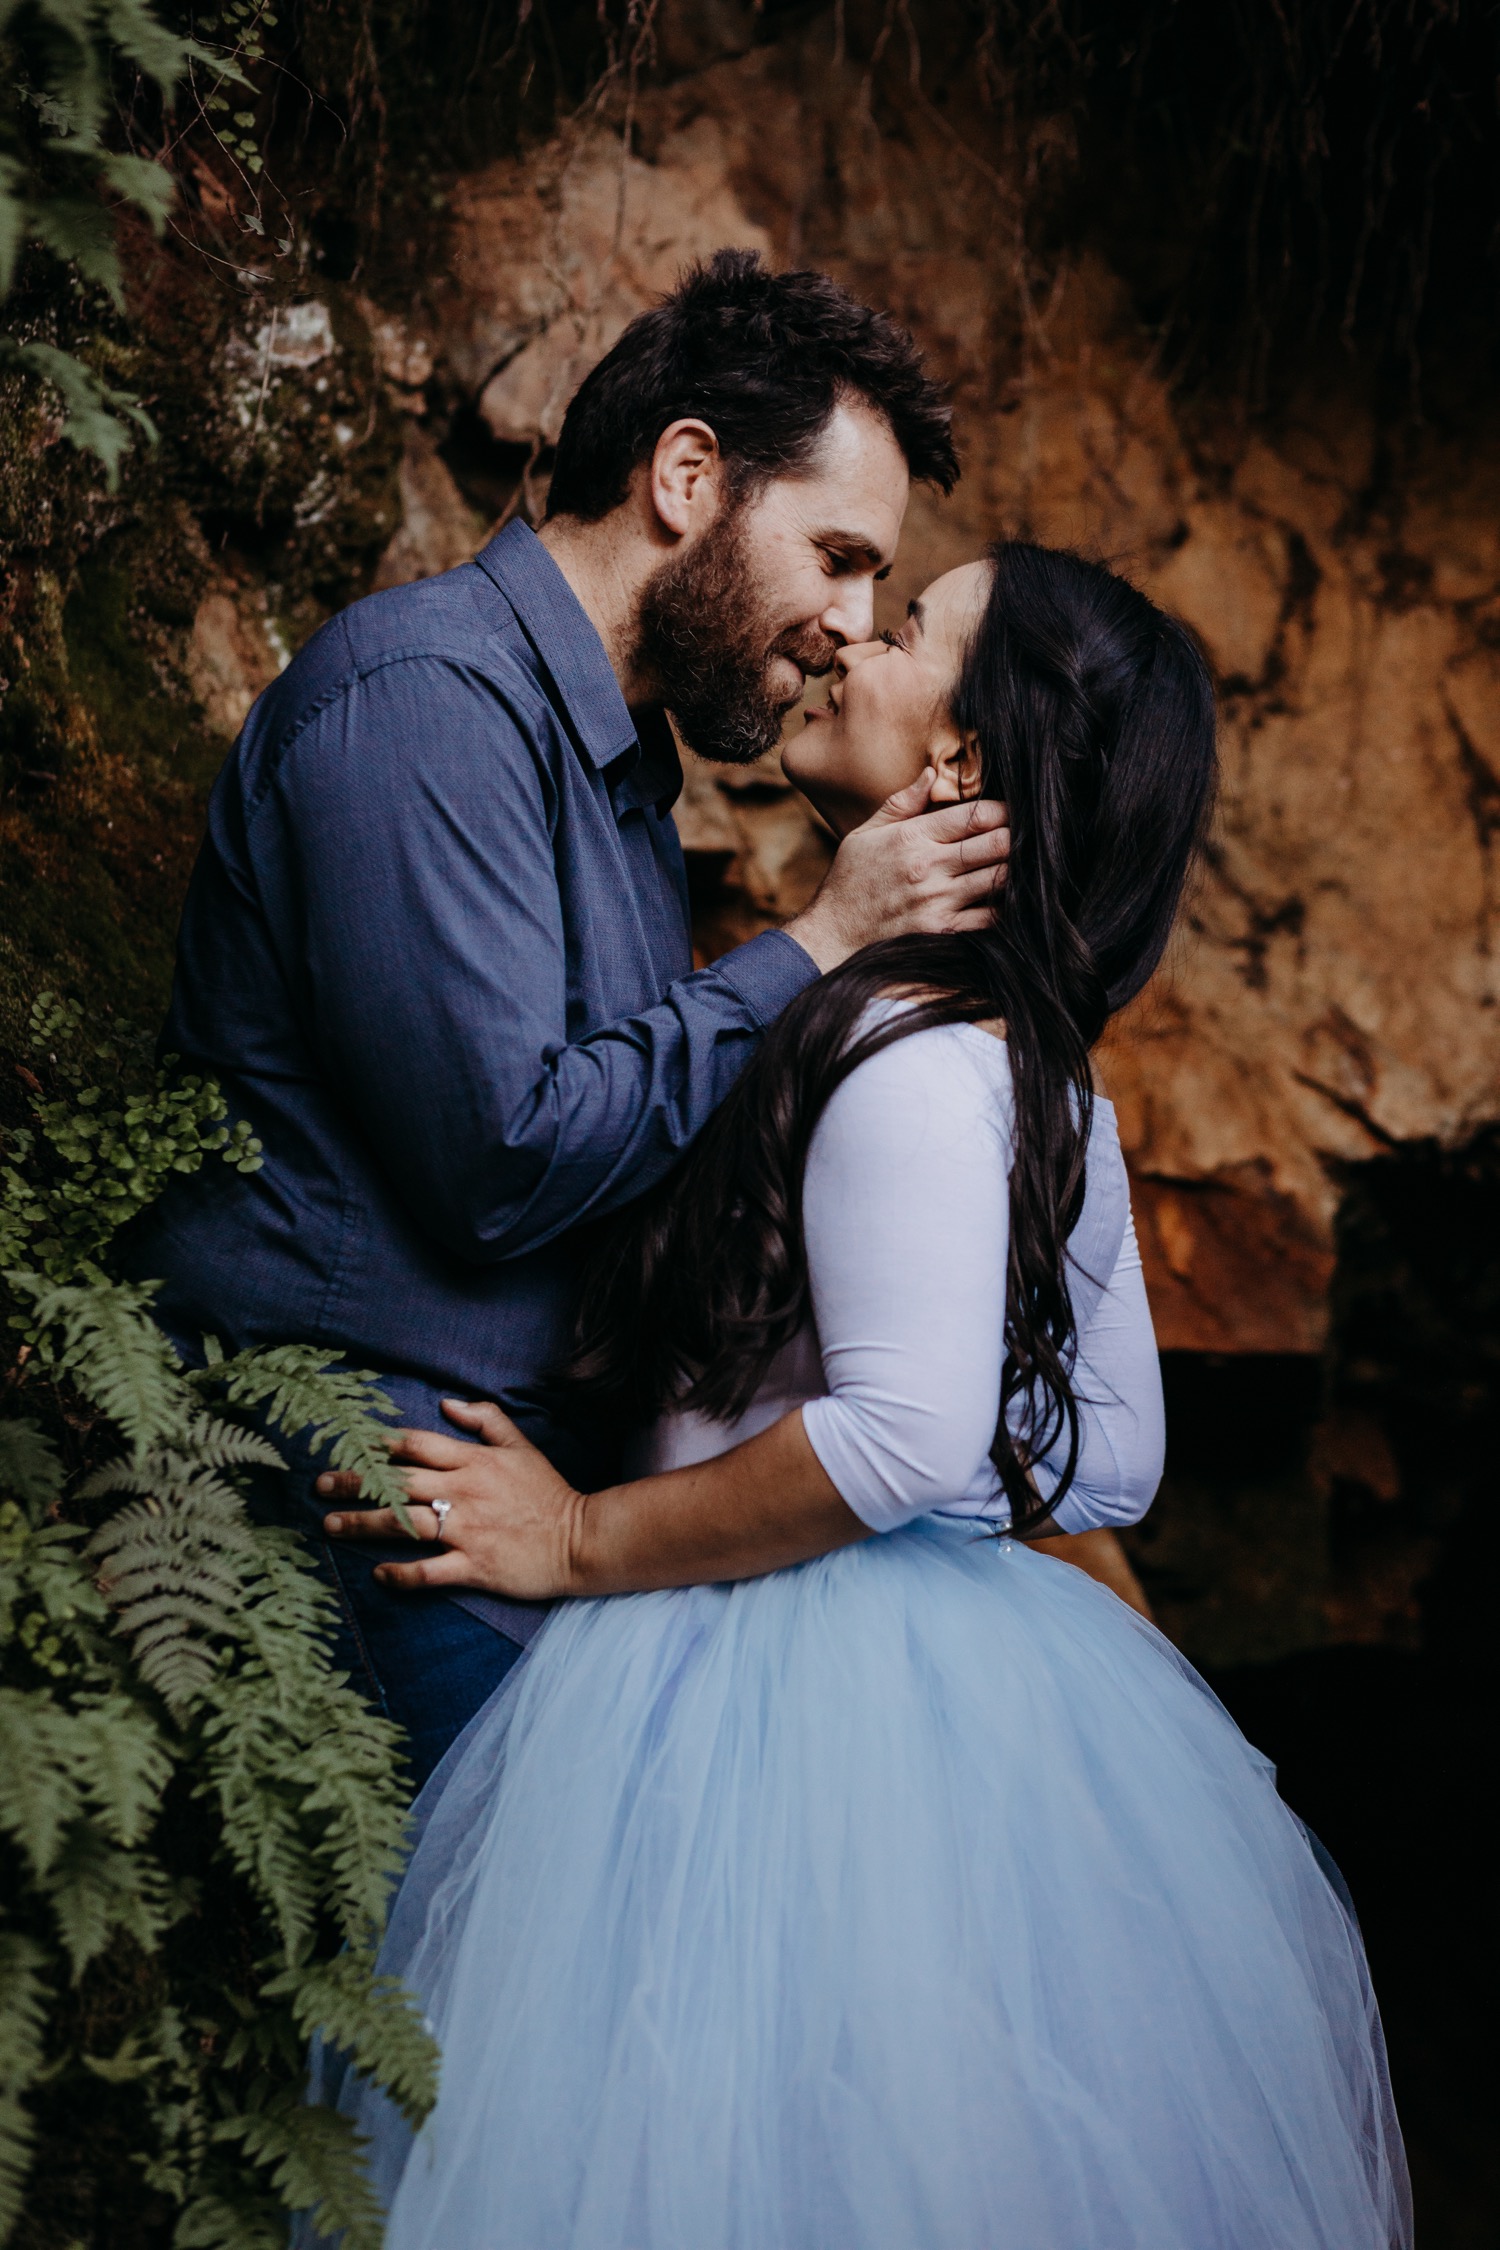 Man leads in to kiss his fiance amidst the greenery of the American River on their engagement photoshoot.